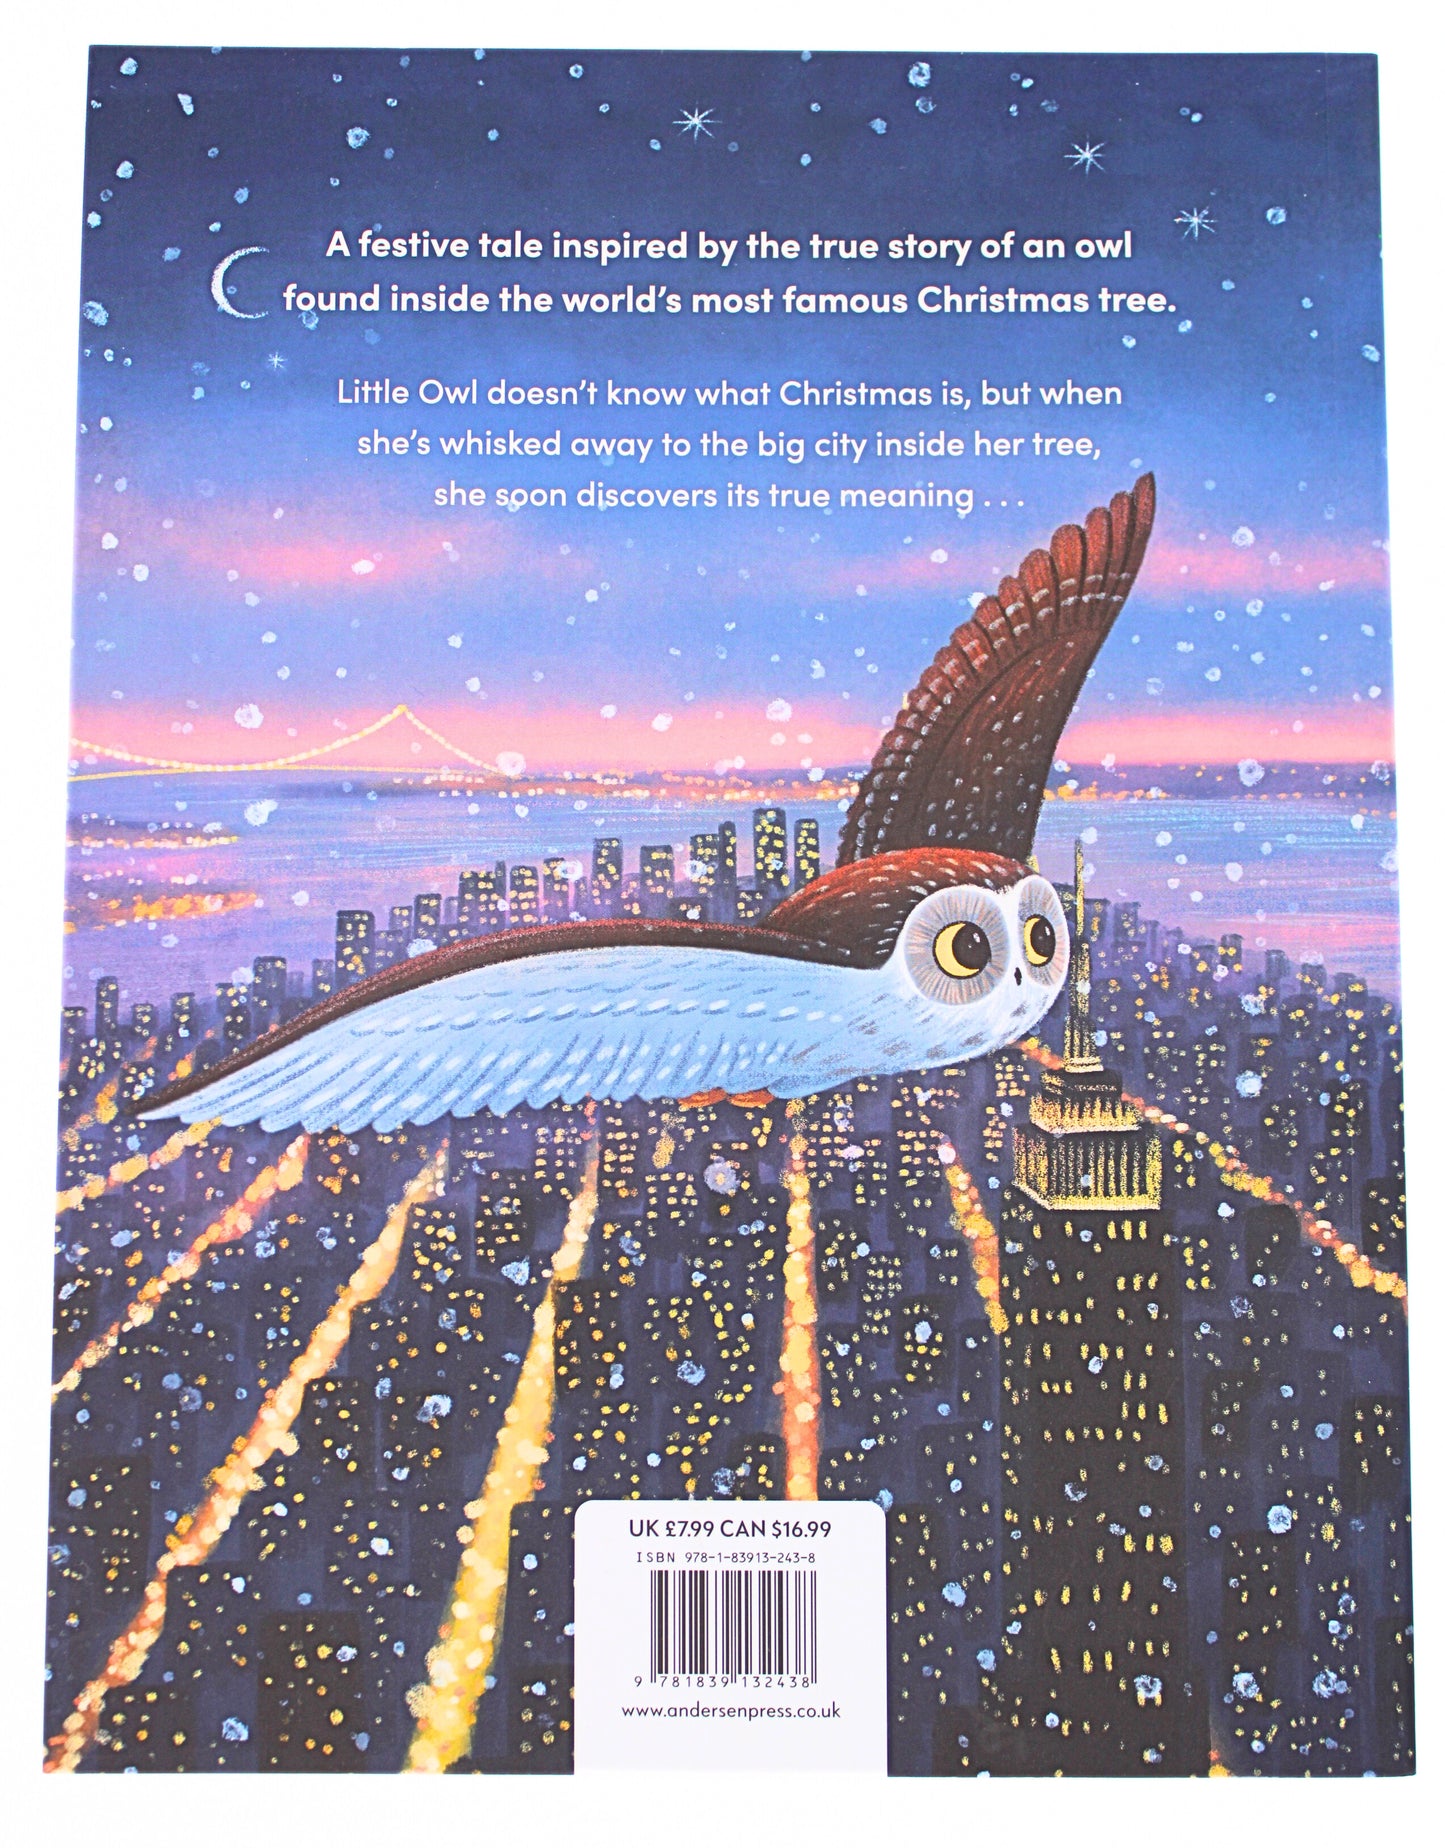 Back Cover of The Christmas Owl by Ellen Kalish and Gideon Sterer